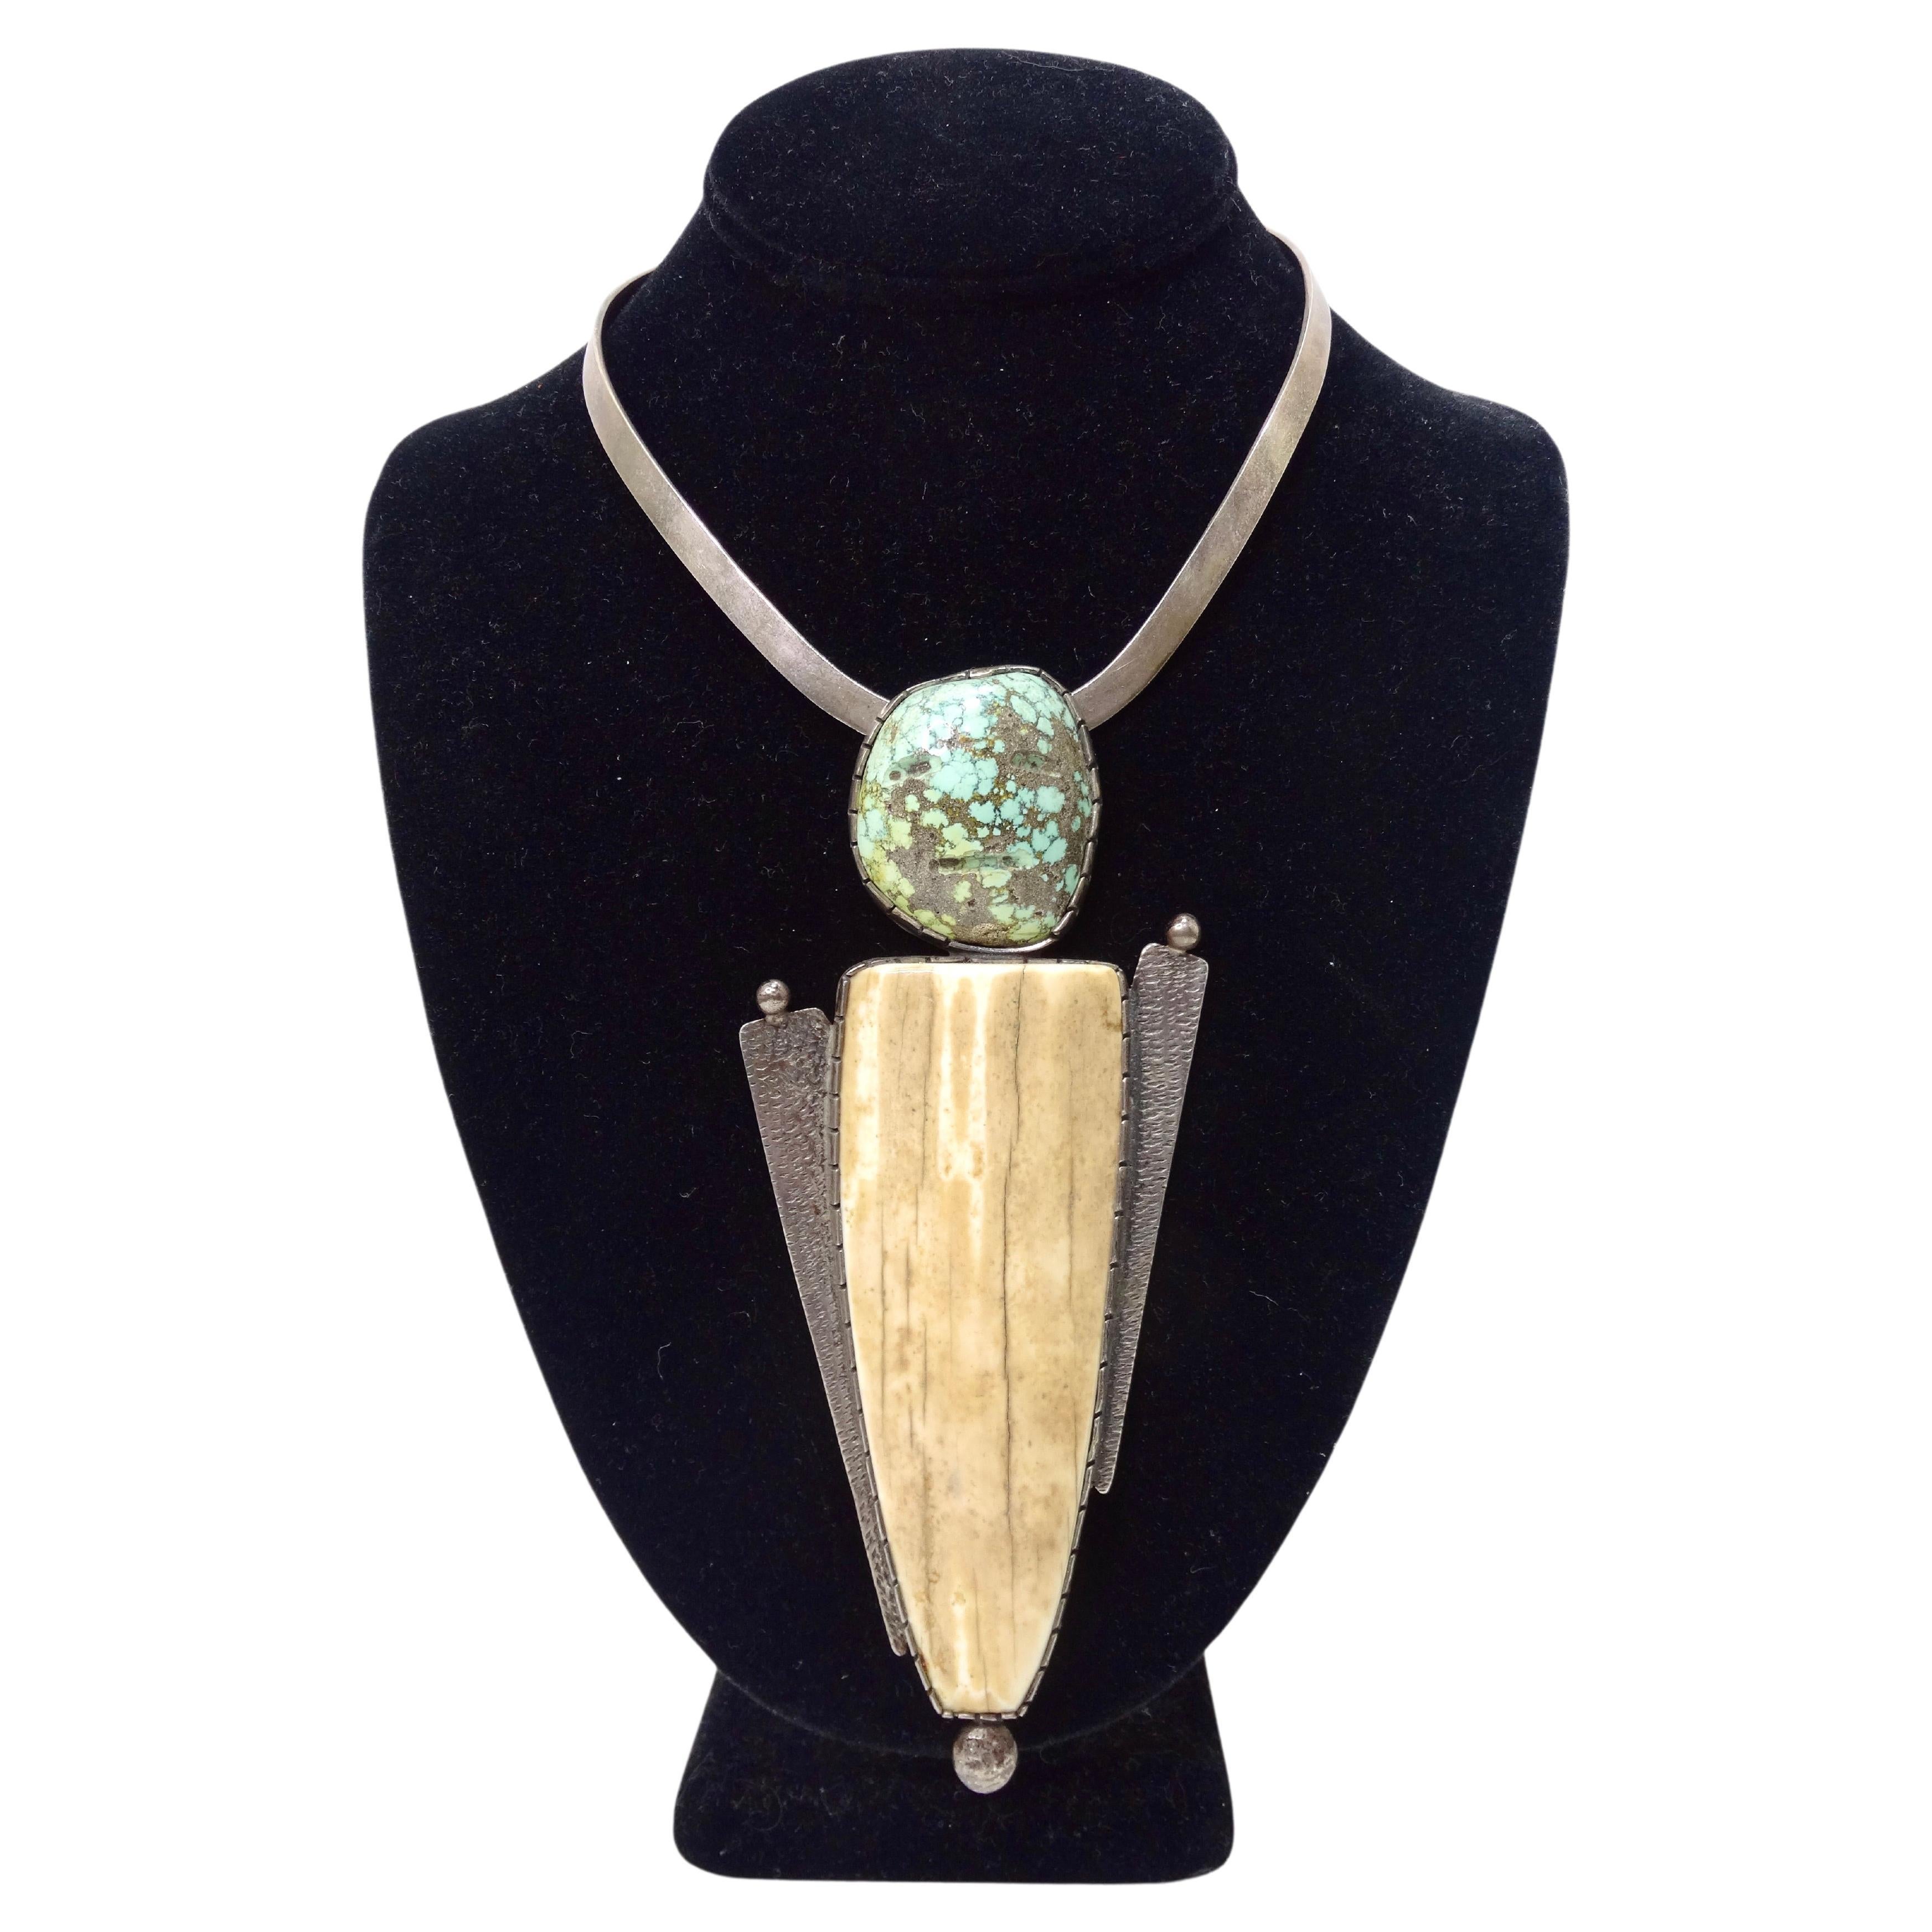 Buddy Lee Handmade Sterling Silver Turquoise Ivory Necklace